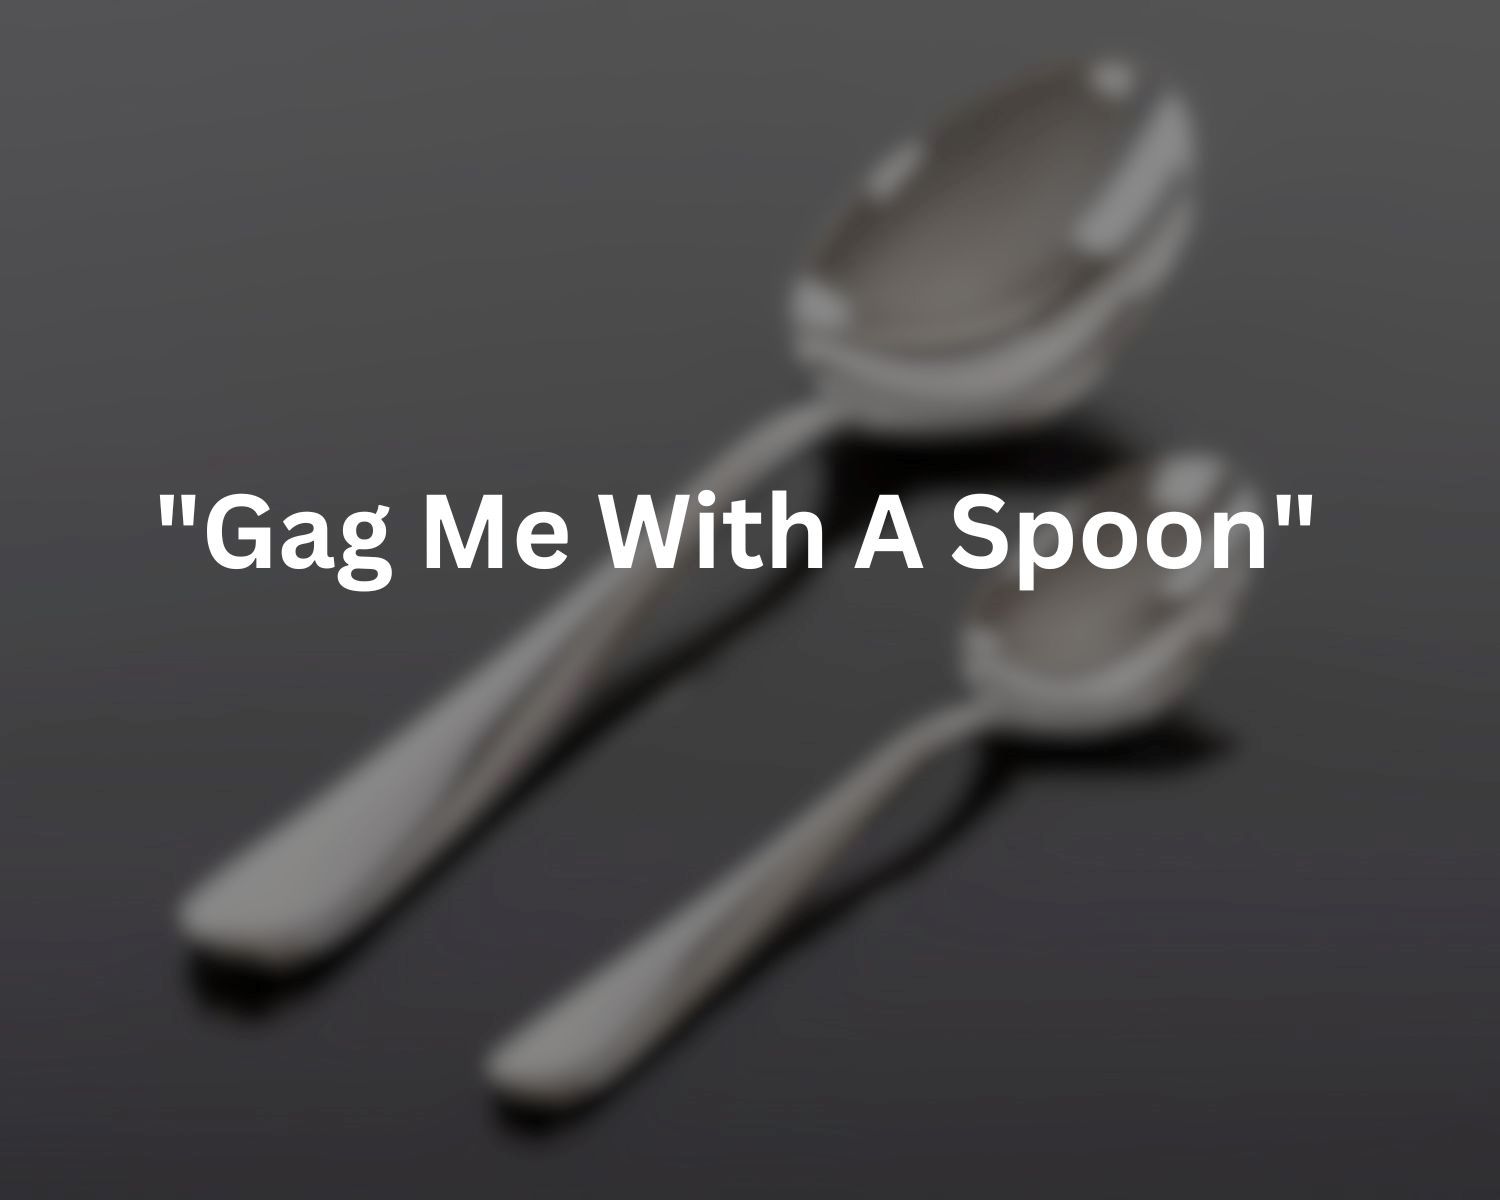 Unveiling The Surprising Origins And Meaning Behind “Gag Me With A Spoon”